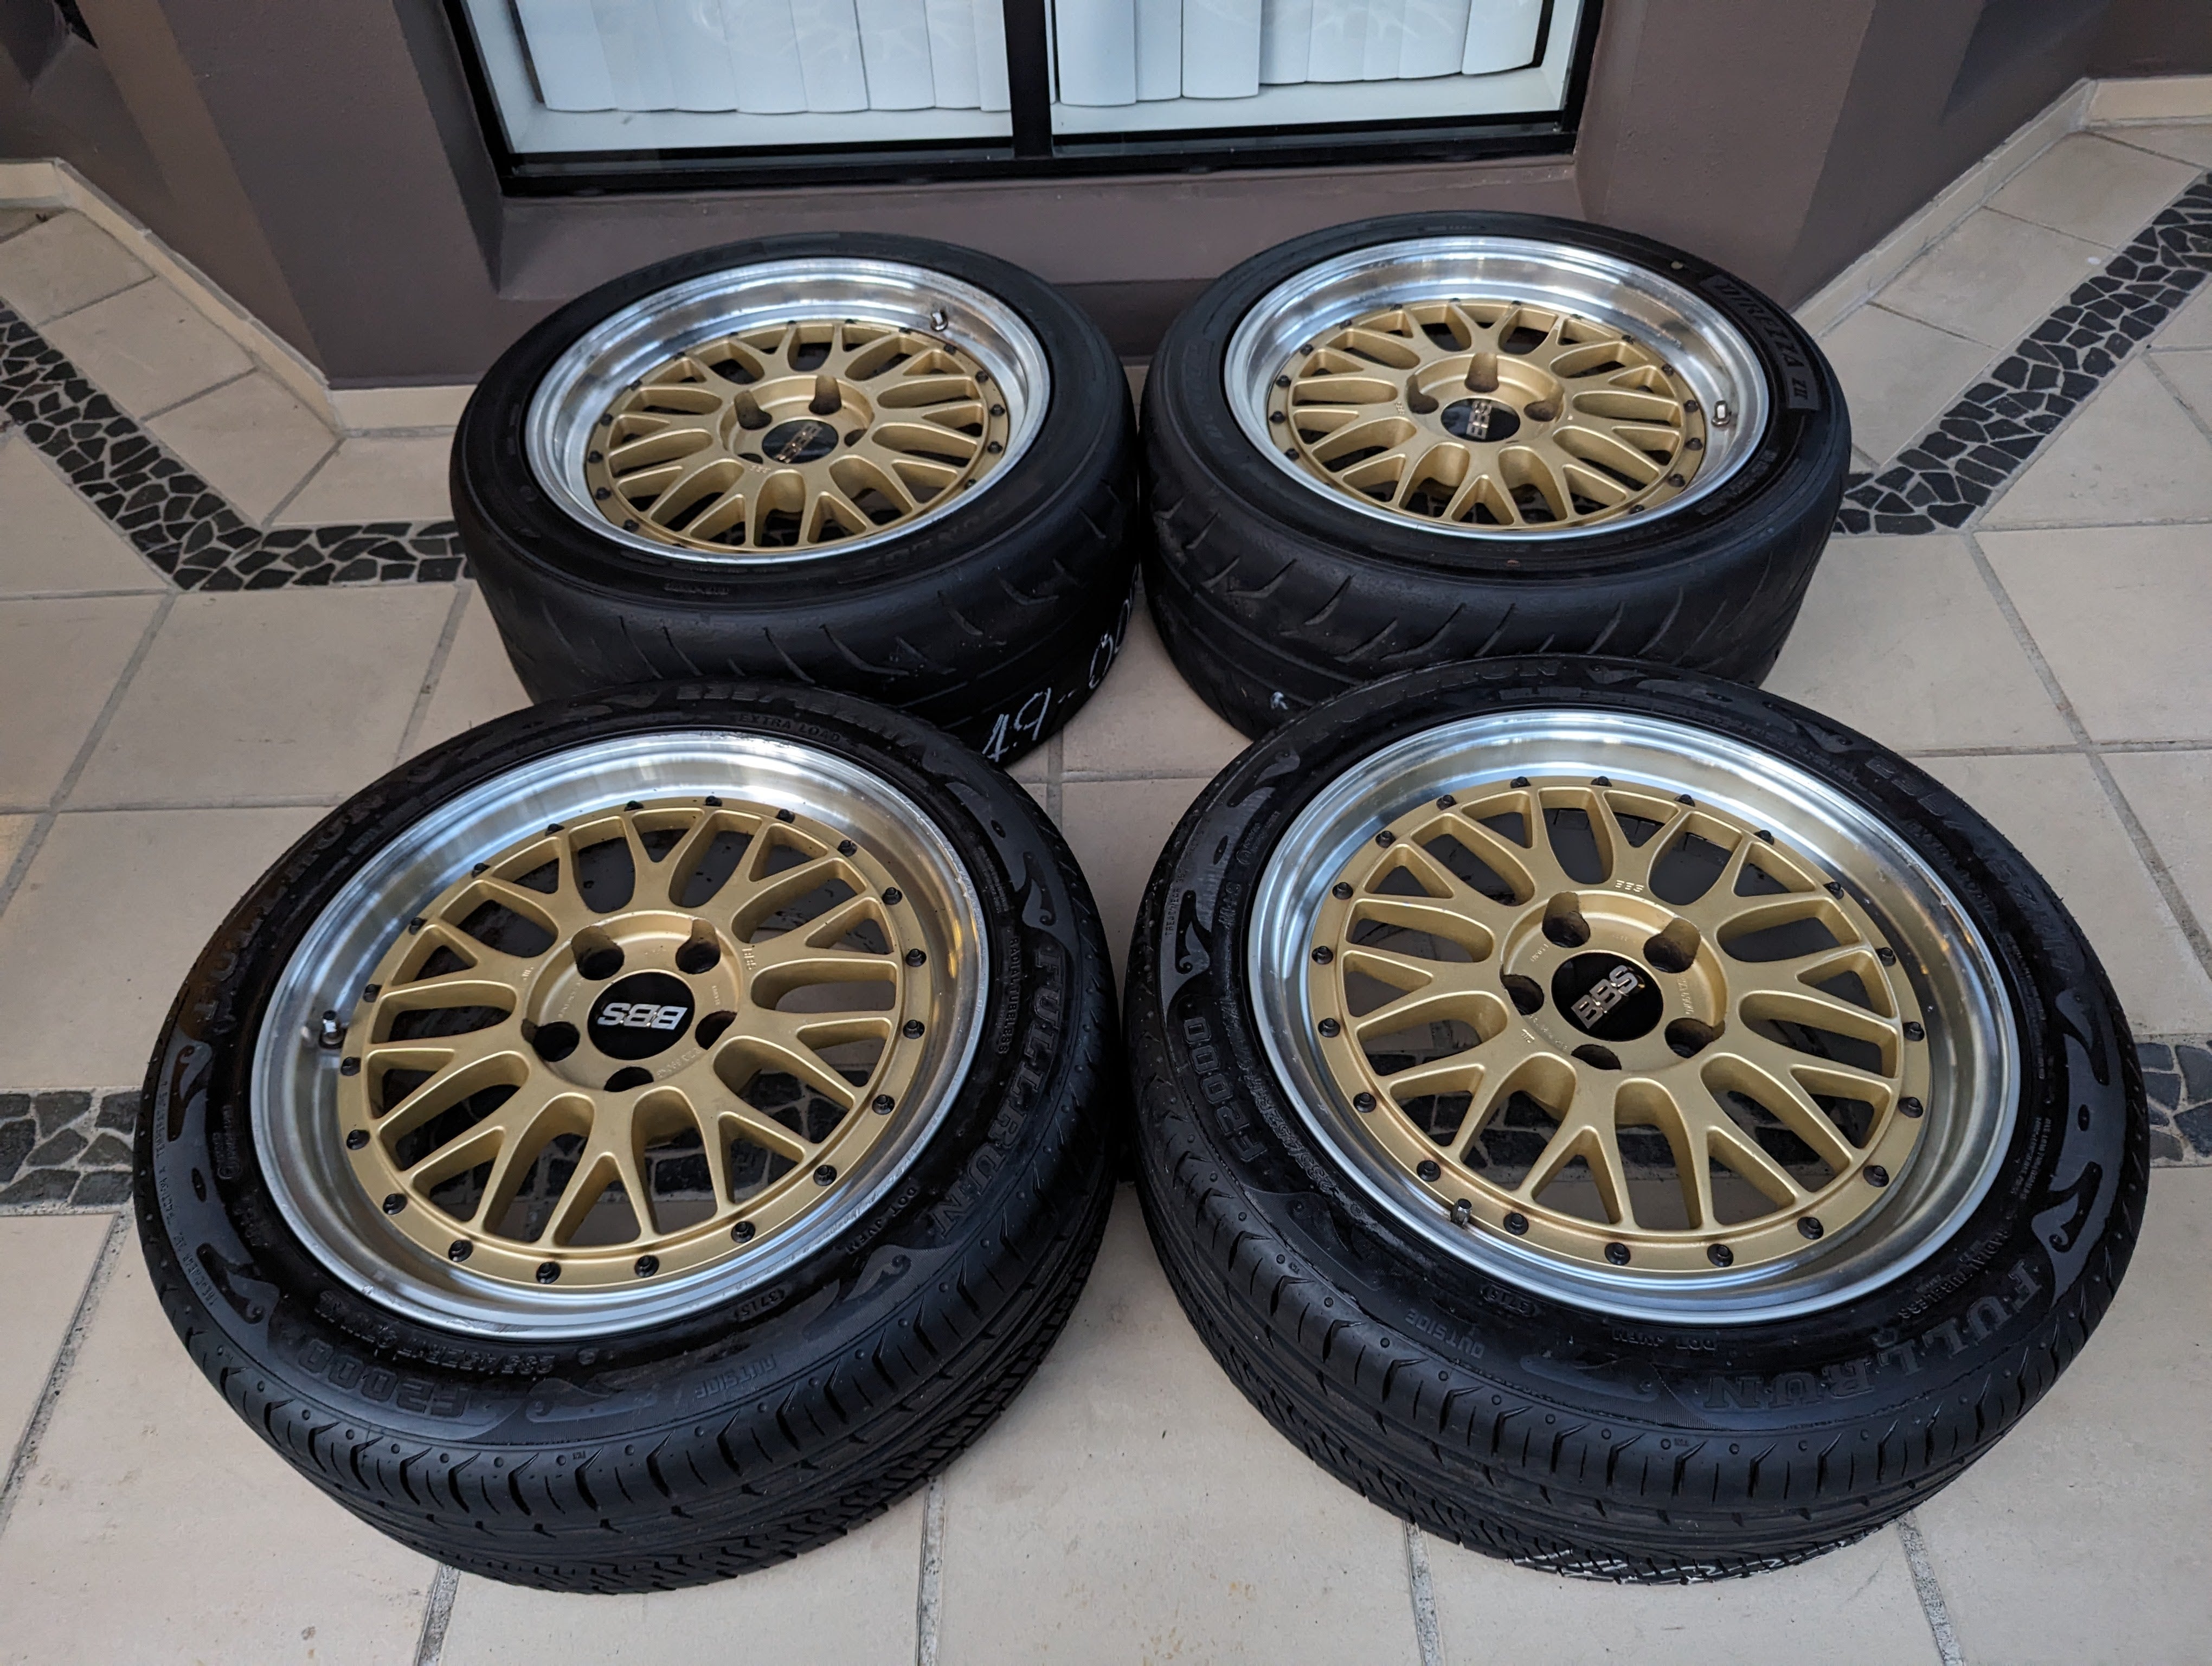 BBS LM (Gold) with Genuine BBS Center Caps and Tyres